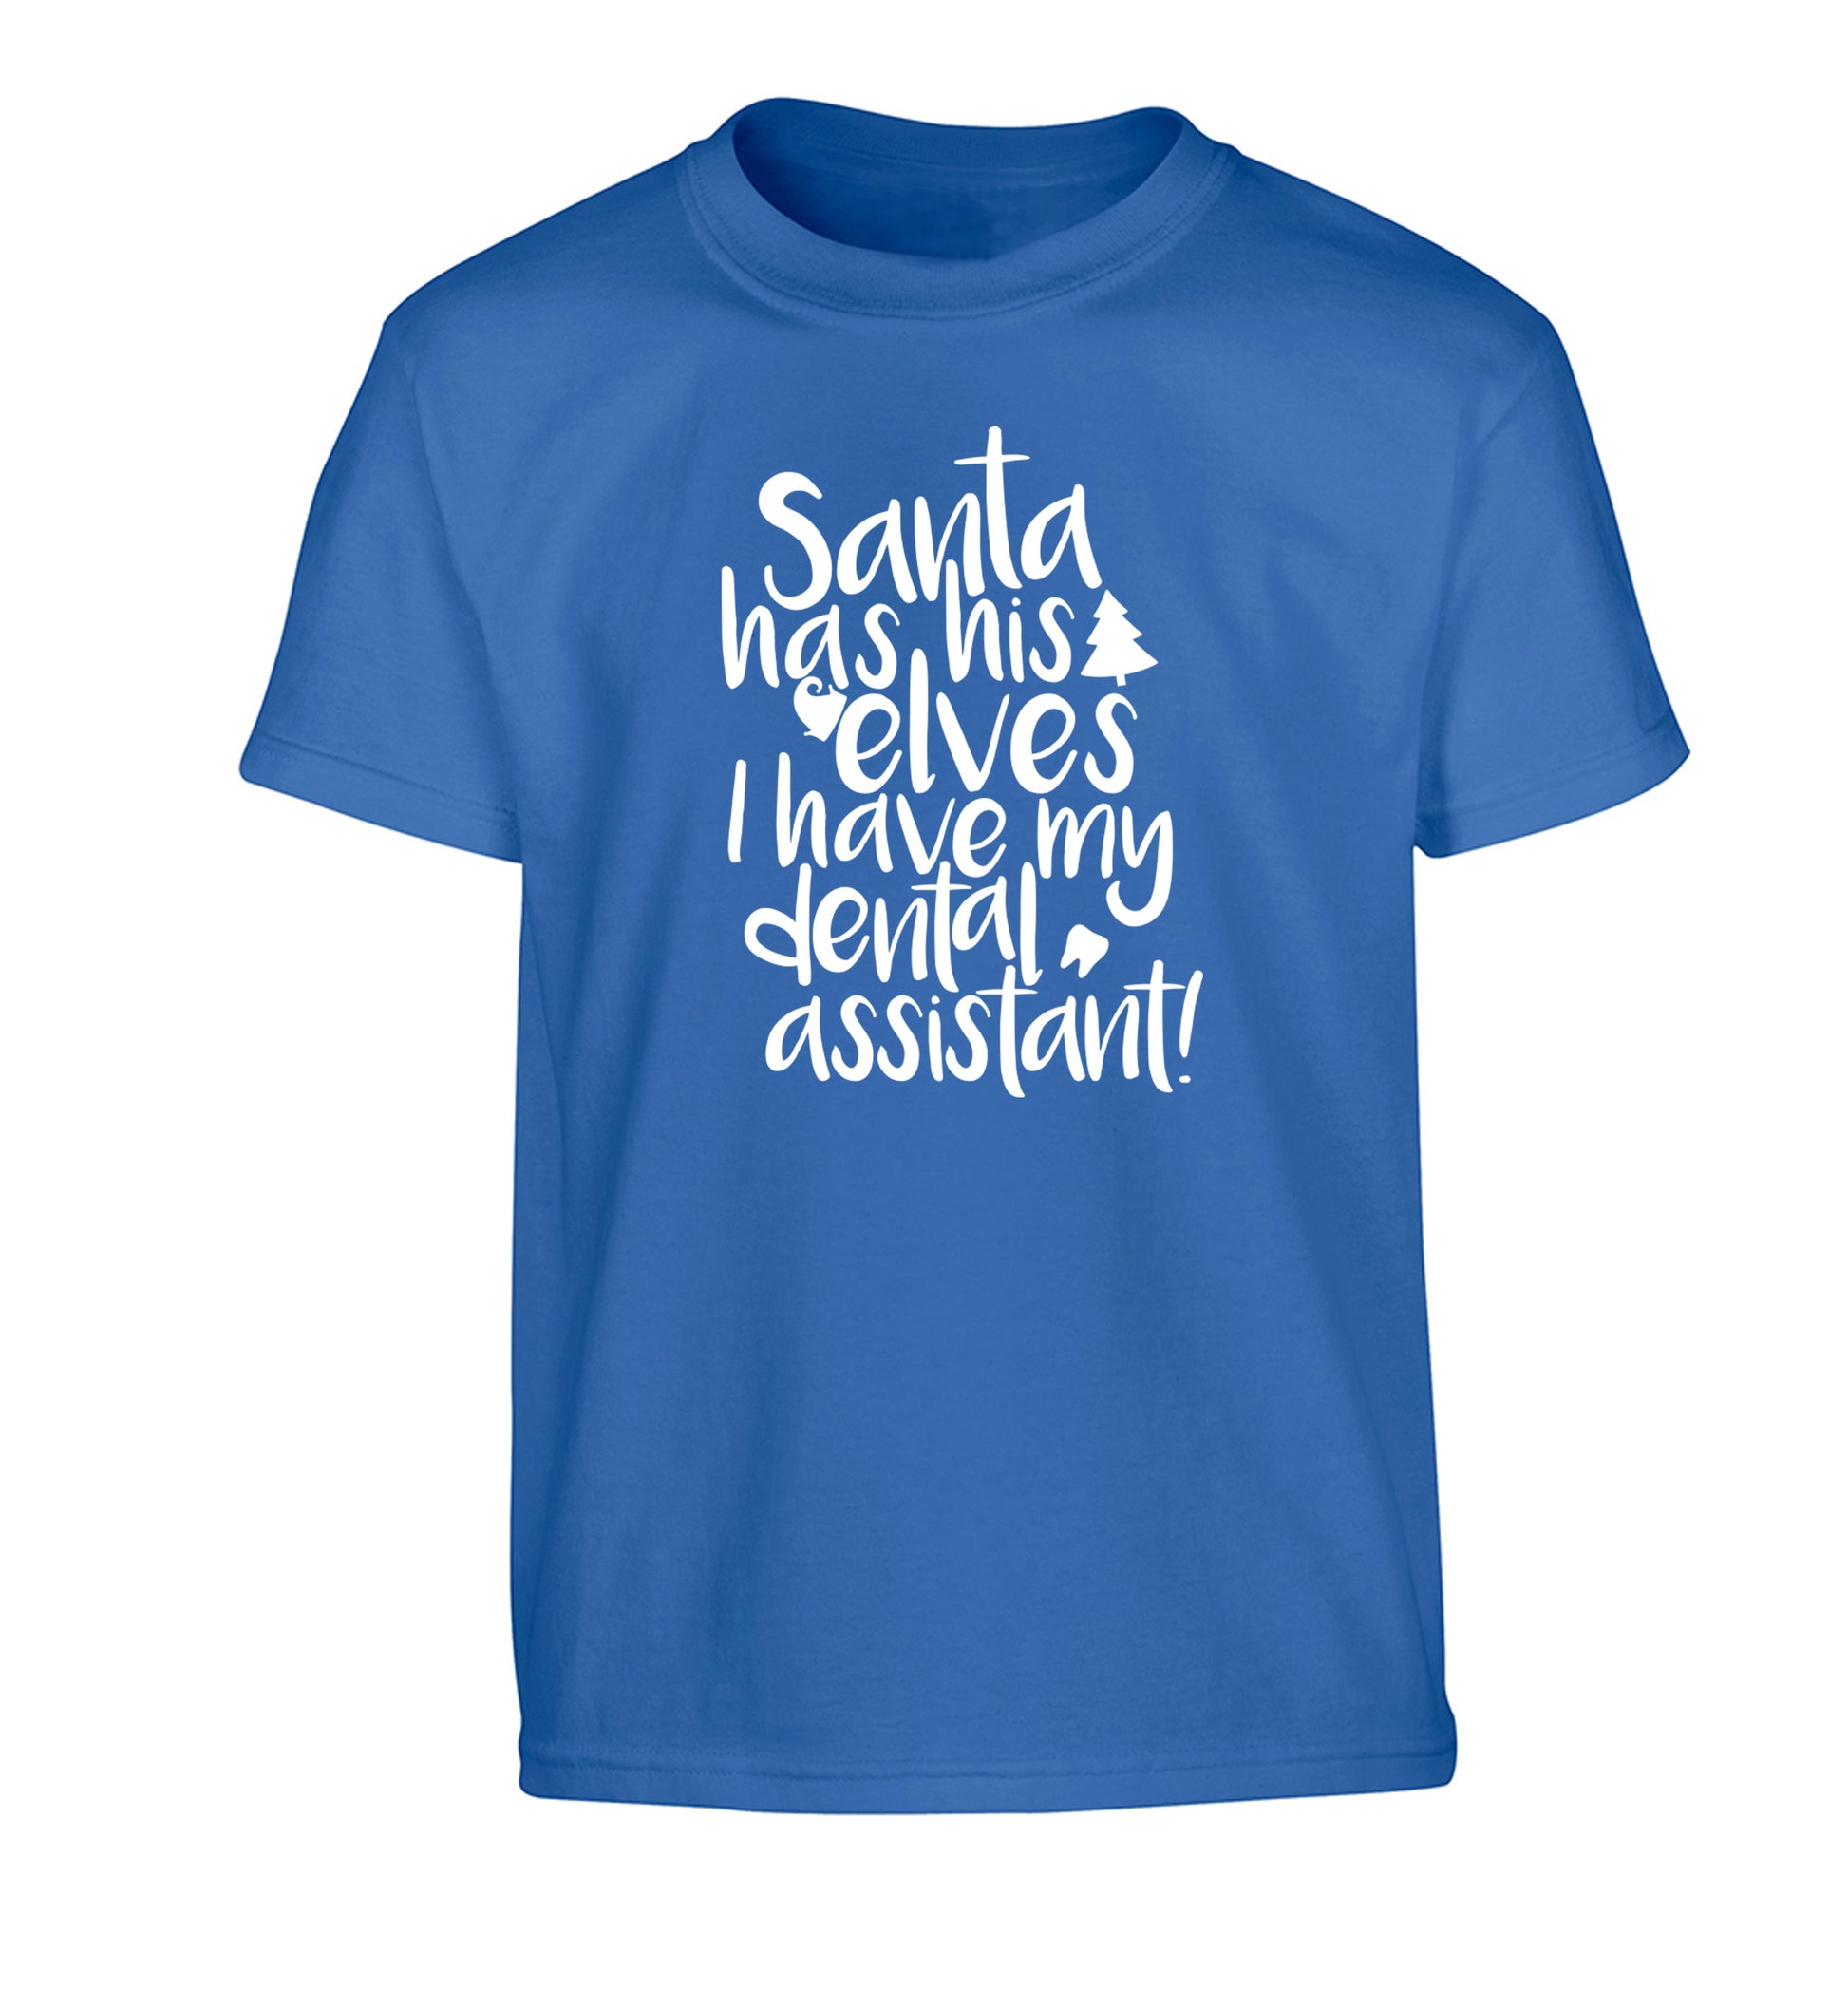 Santa has his elves I have my dental assistant Children's blue Tshirt 12-14 Years